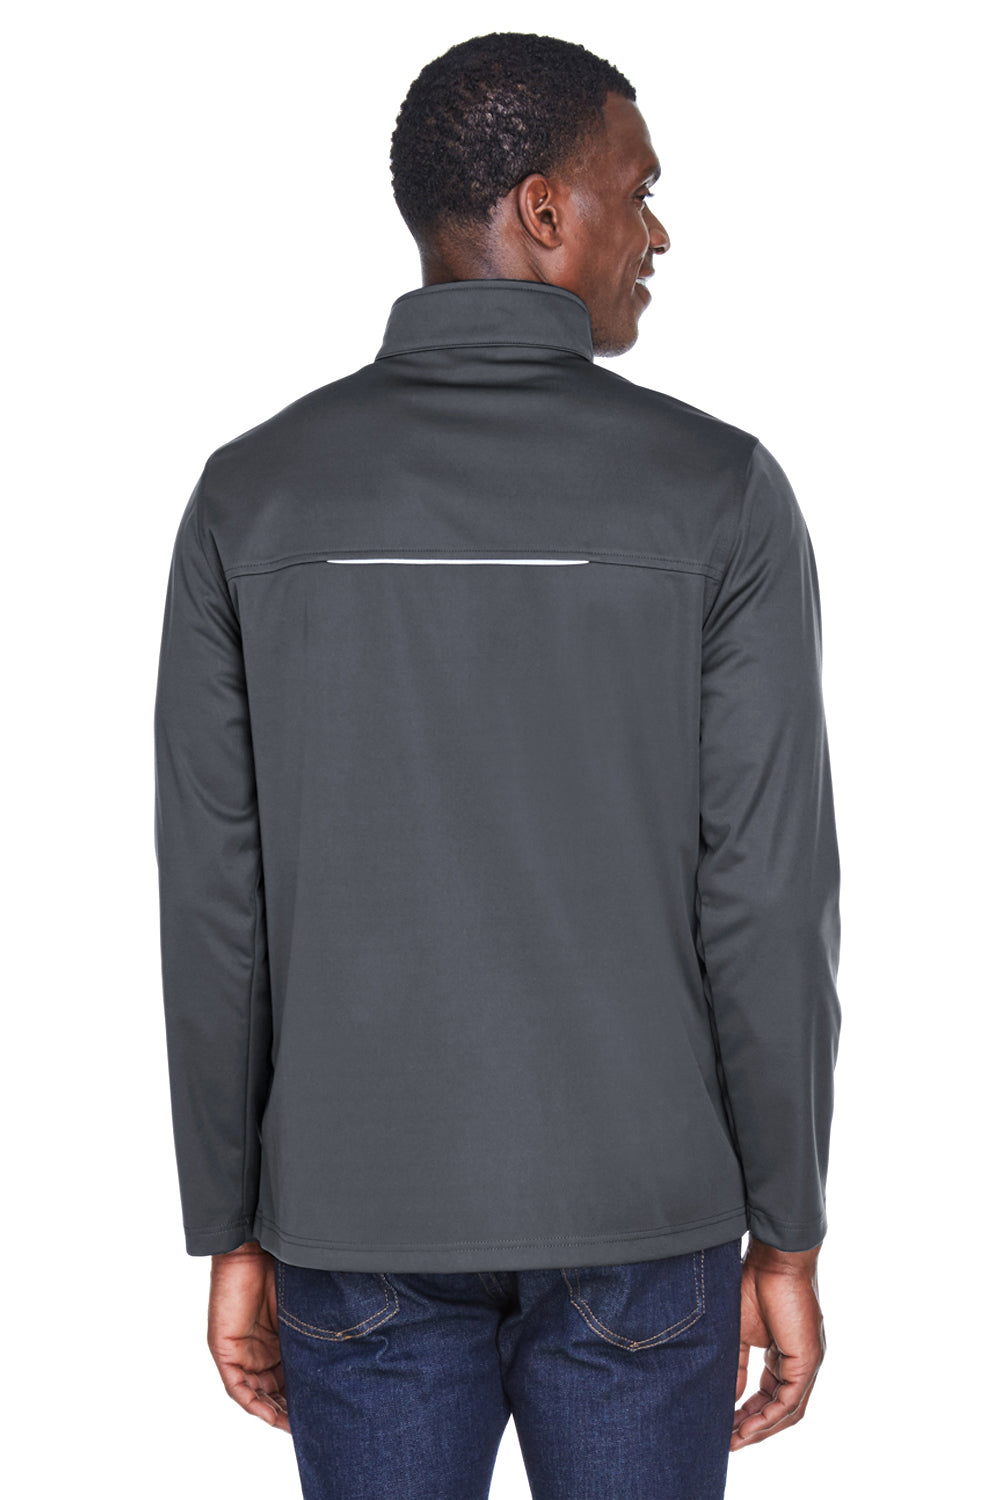 Core 365 CE708 Mens Techno Lite Water Resistant Full Zip Jacket Carbon Grey Back